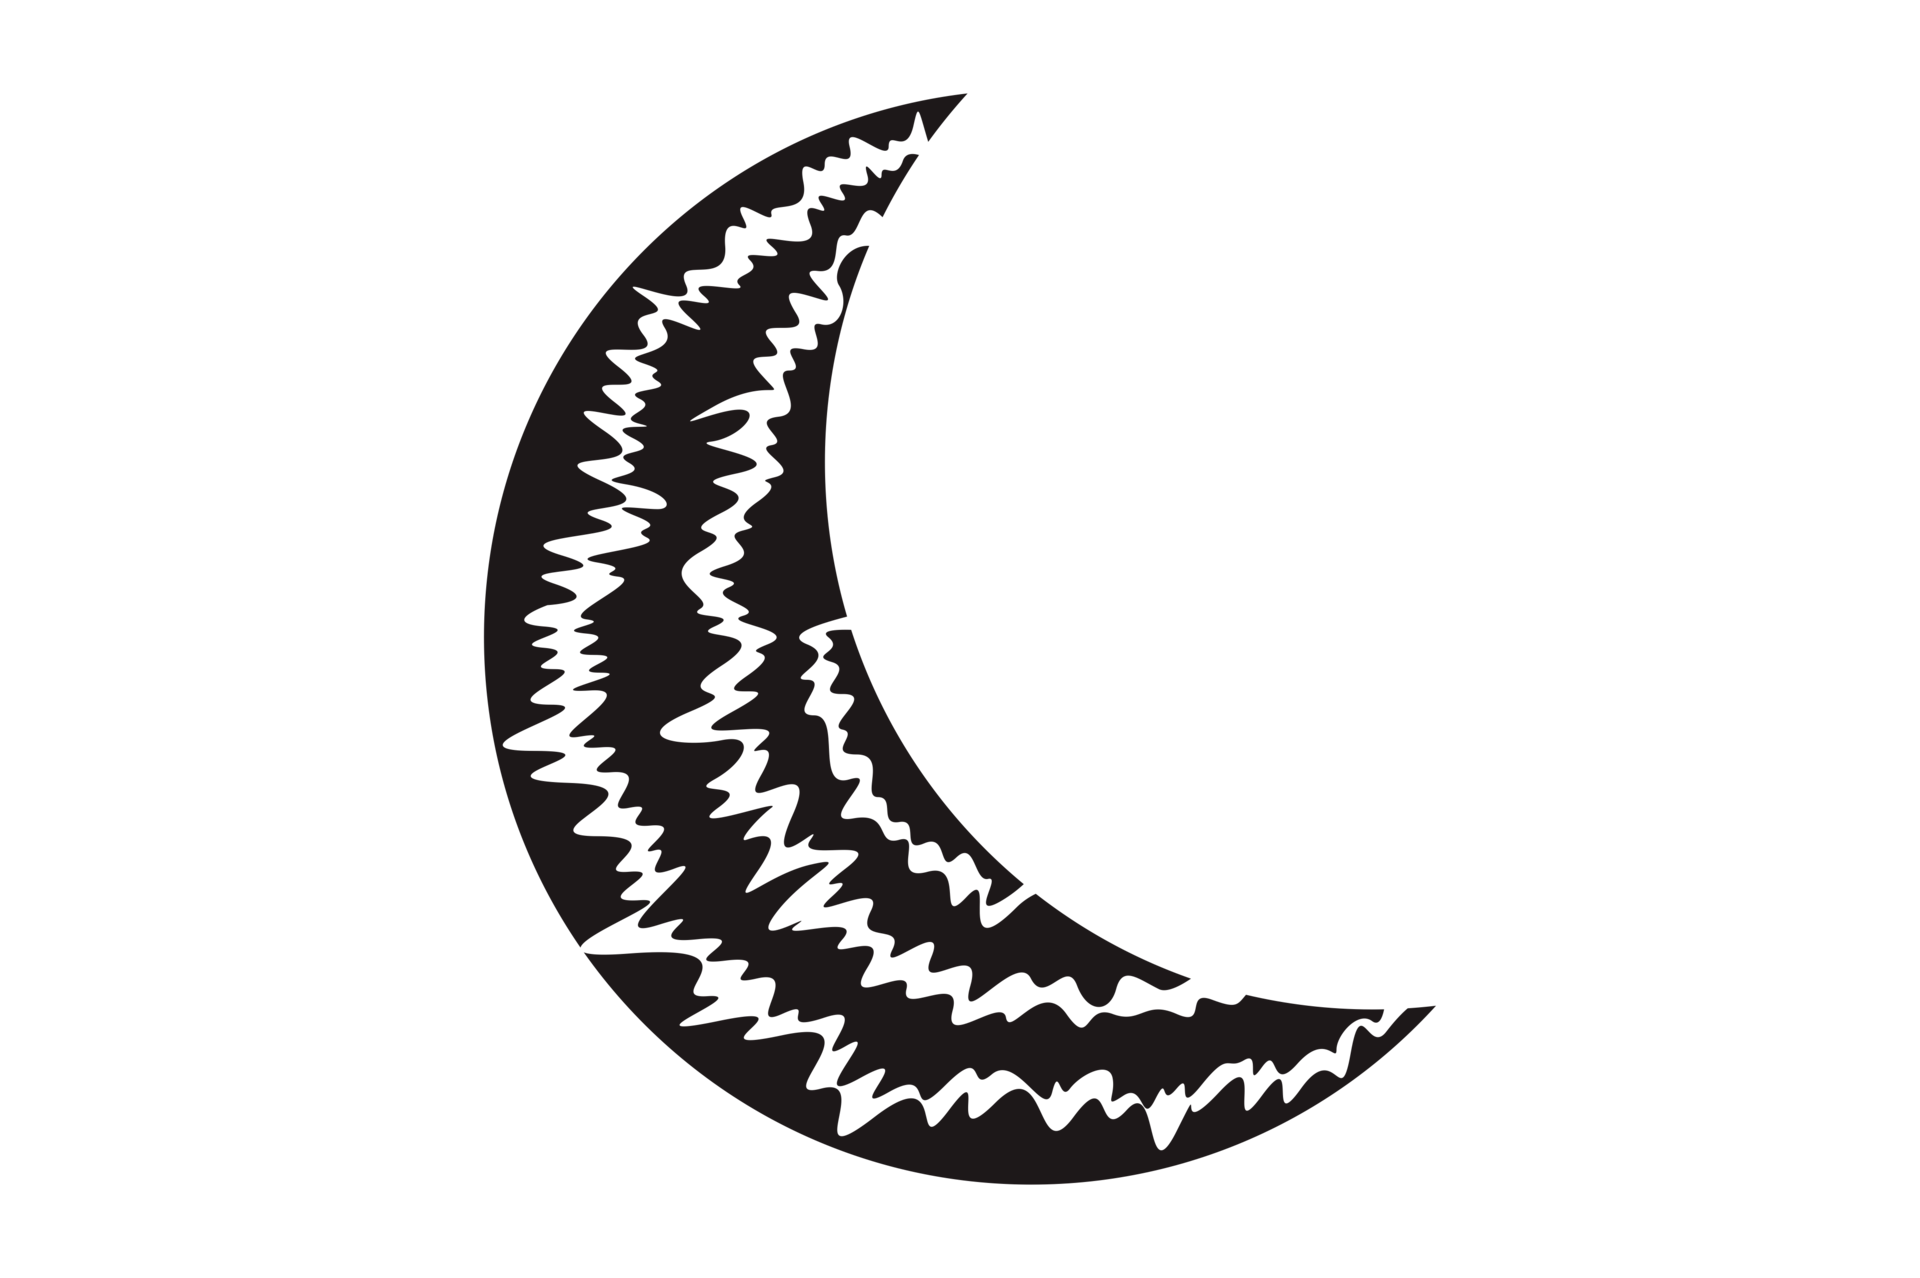 Crescent Moon Silhouette Transparent Background, Moon Silhouette